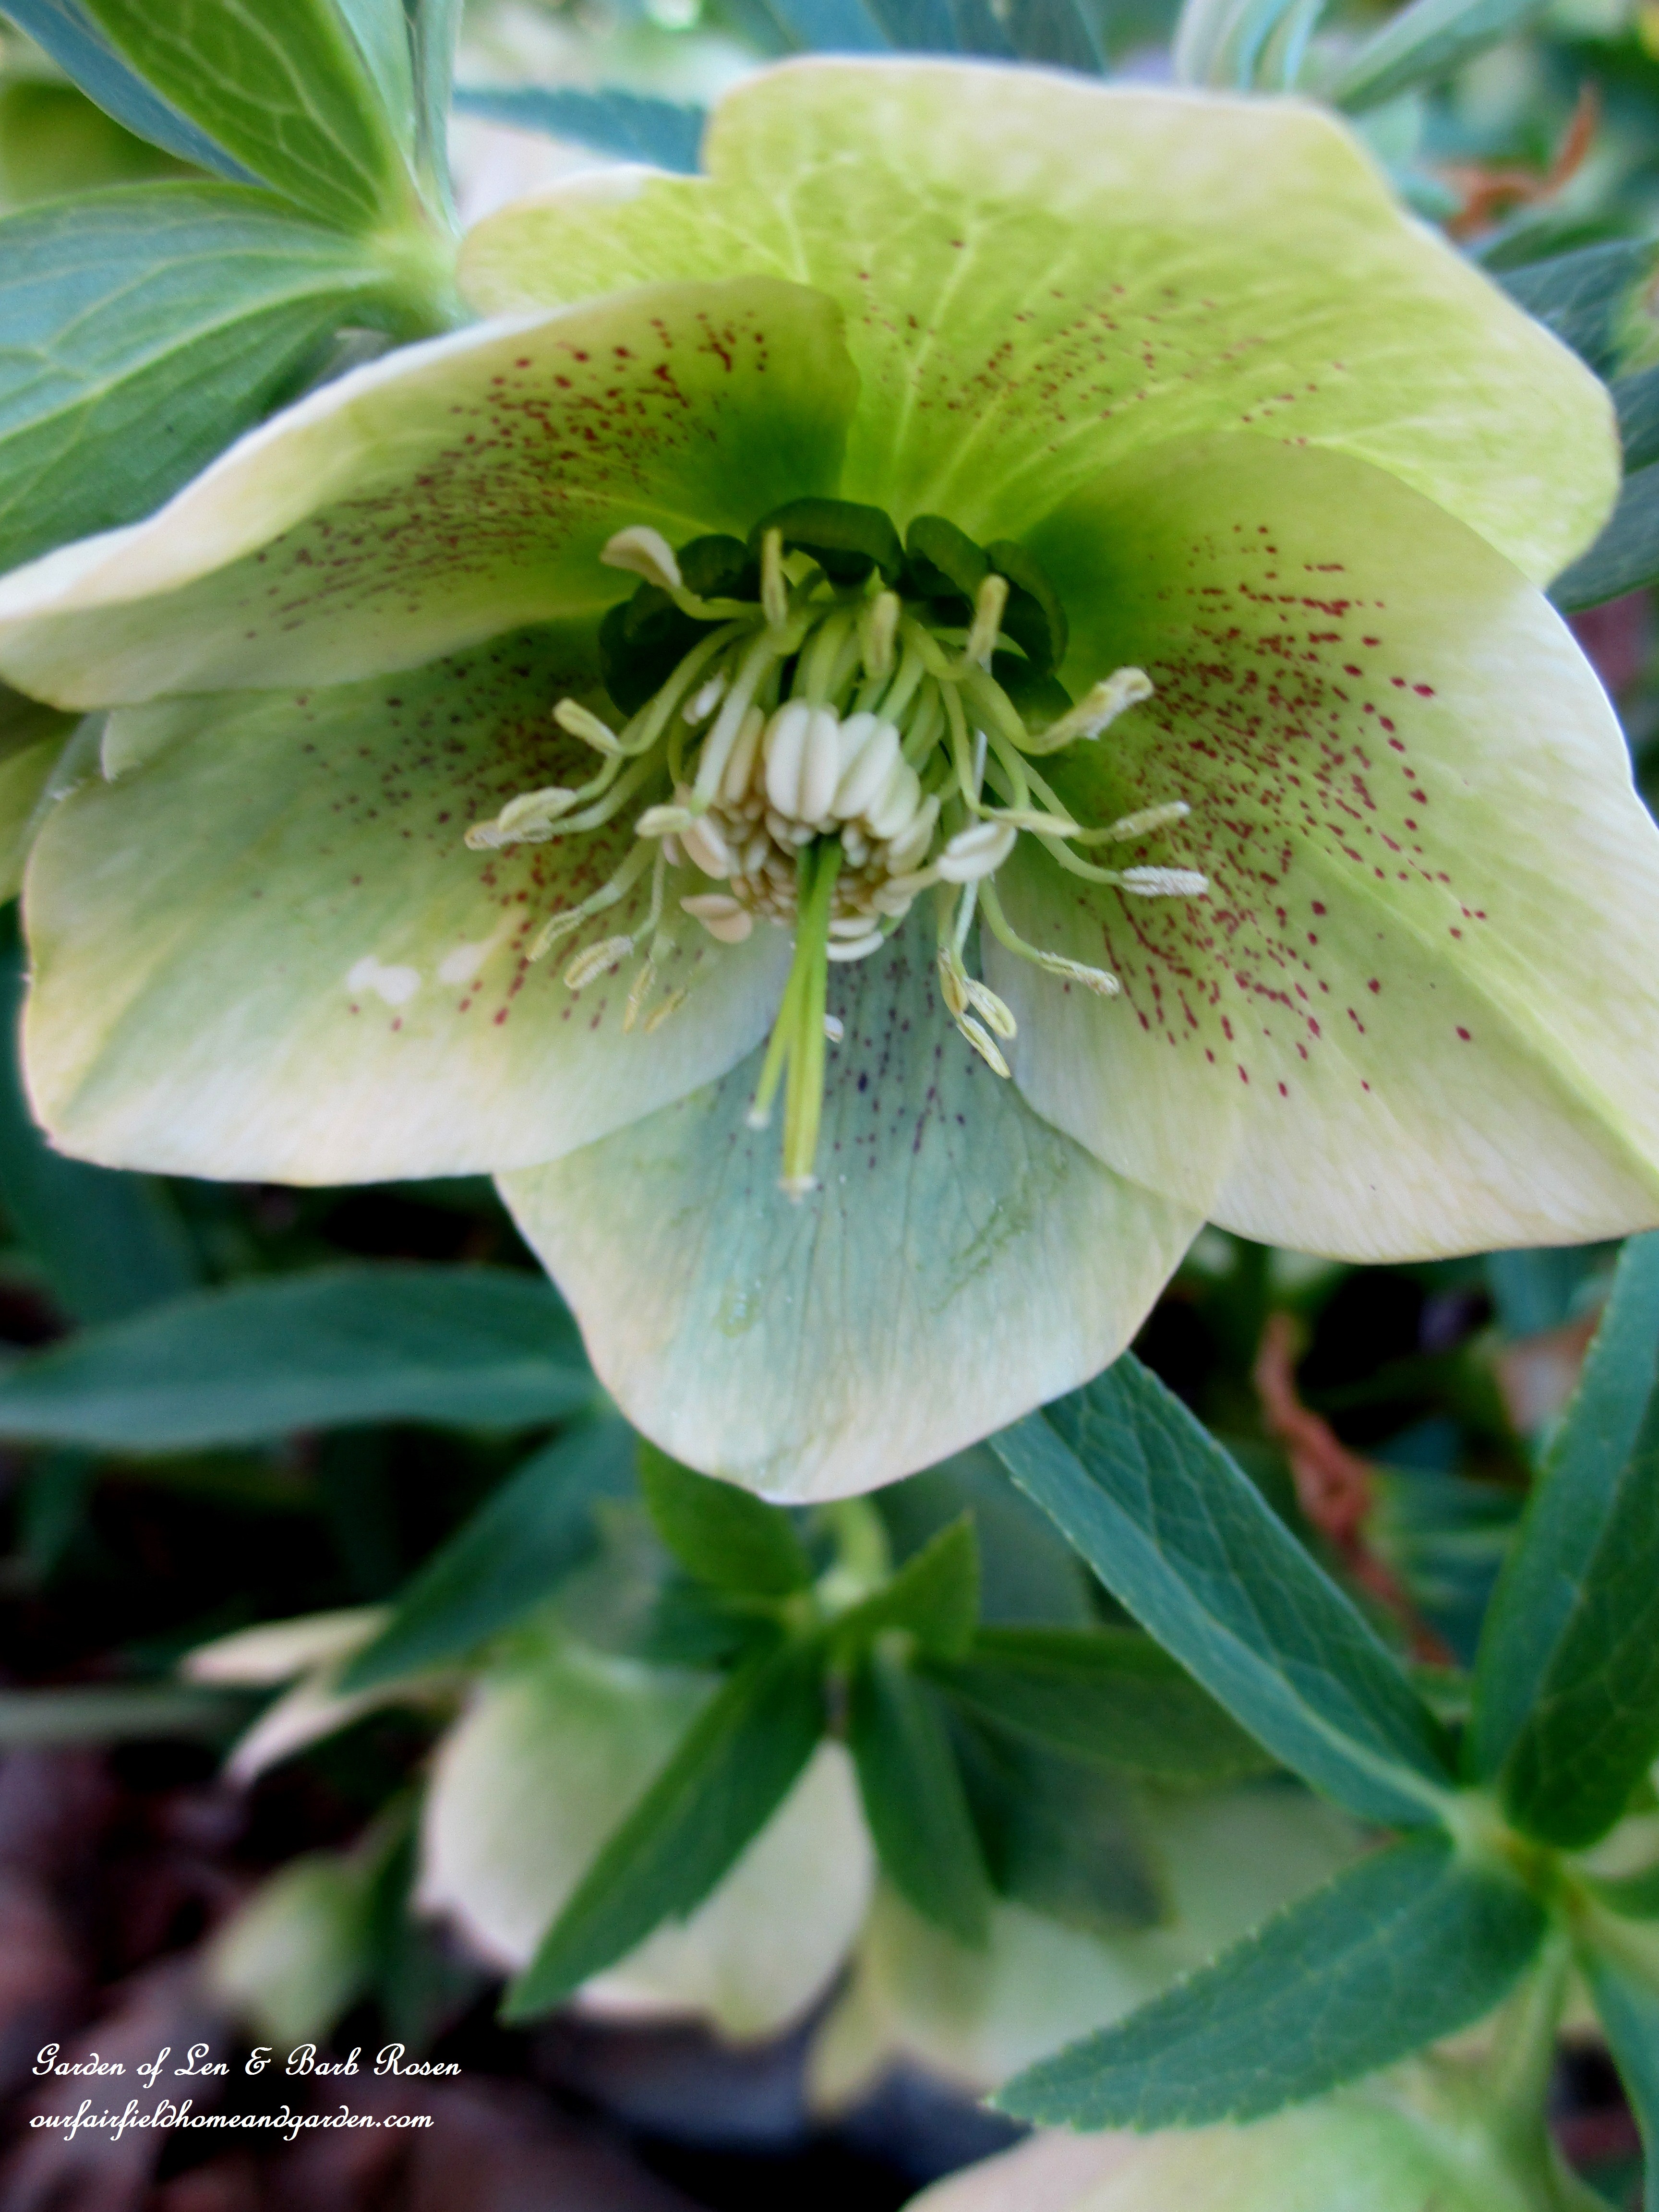 Hellebore https://ourfairfieldhomeandgarden.com/signs-of-spring-at-our-fairfield-home-garden/